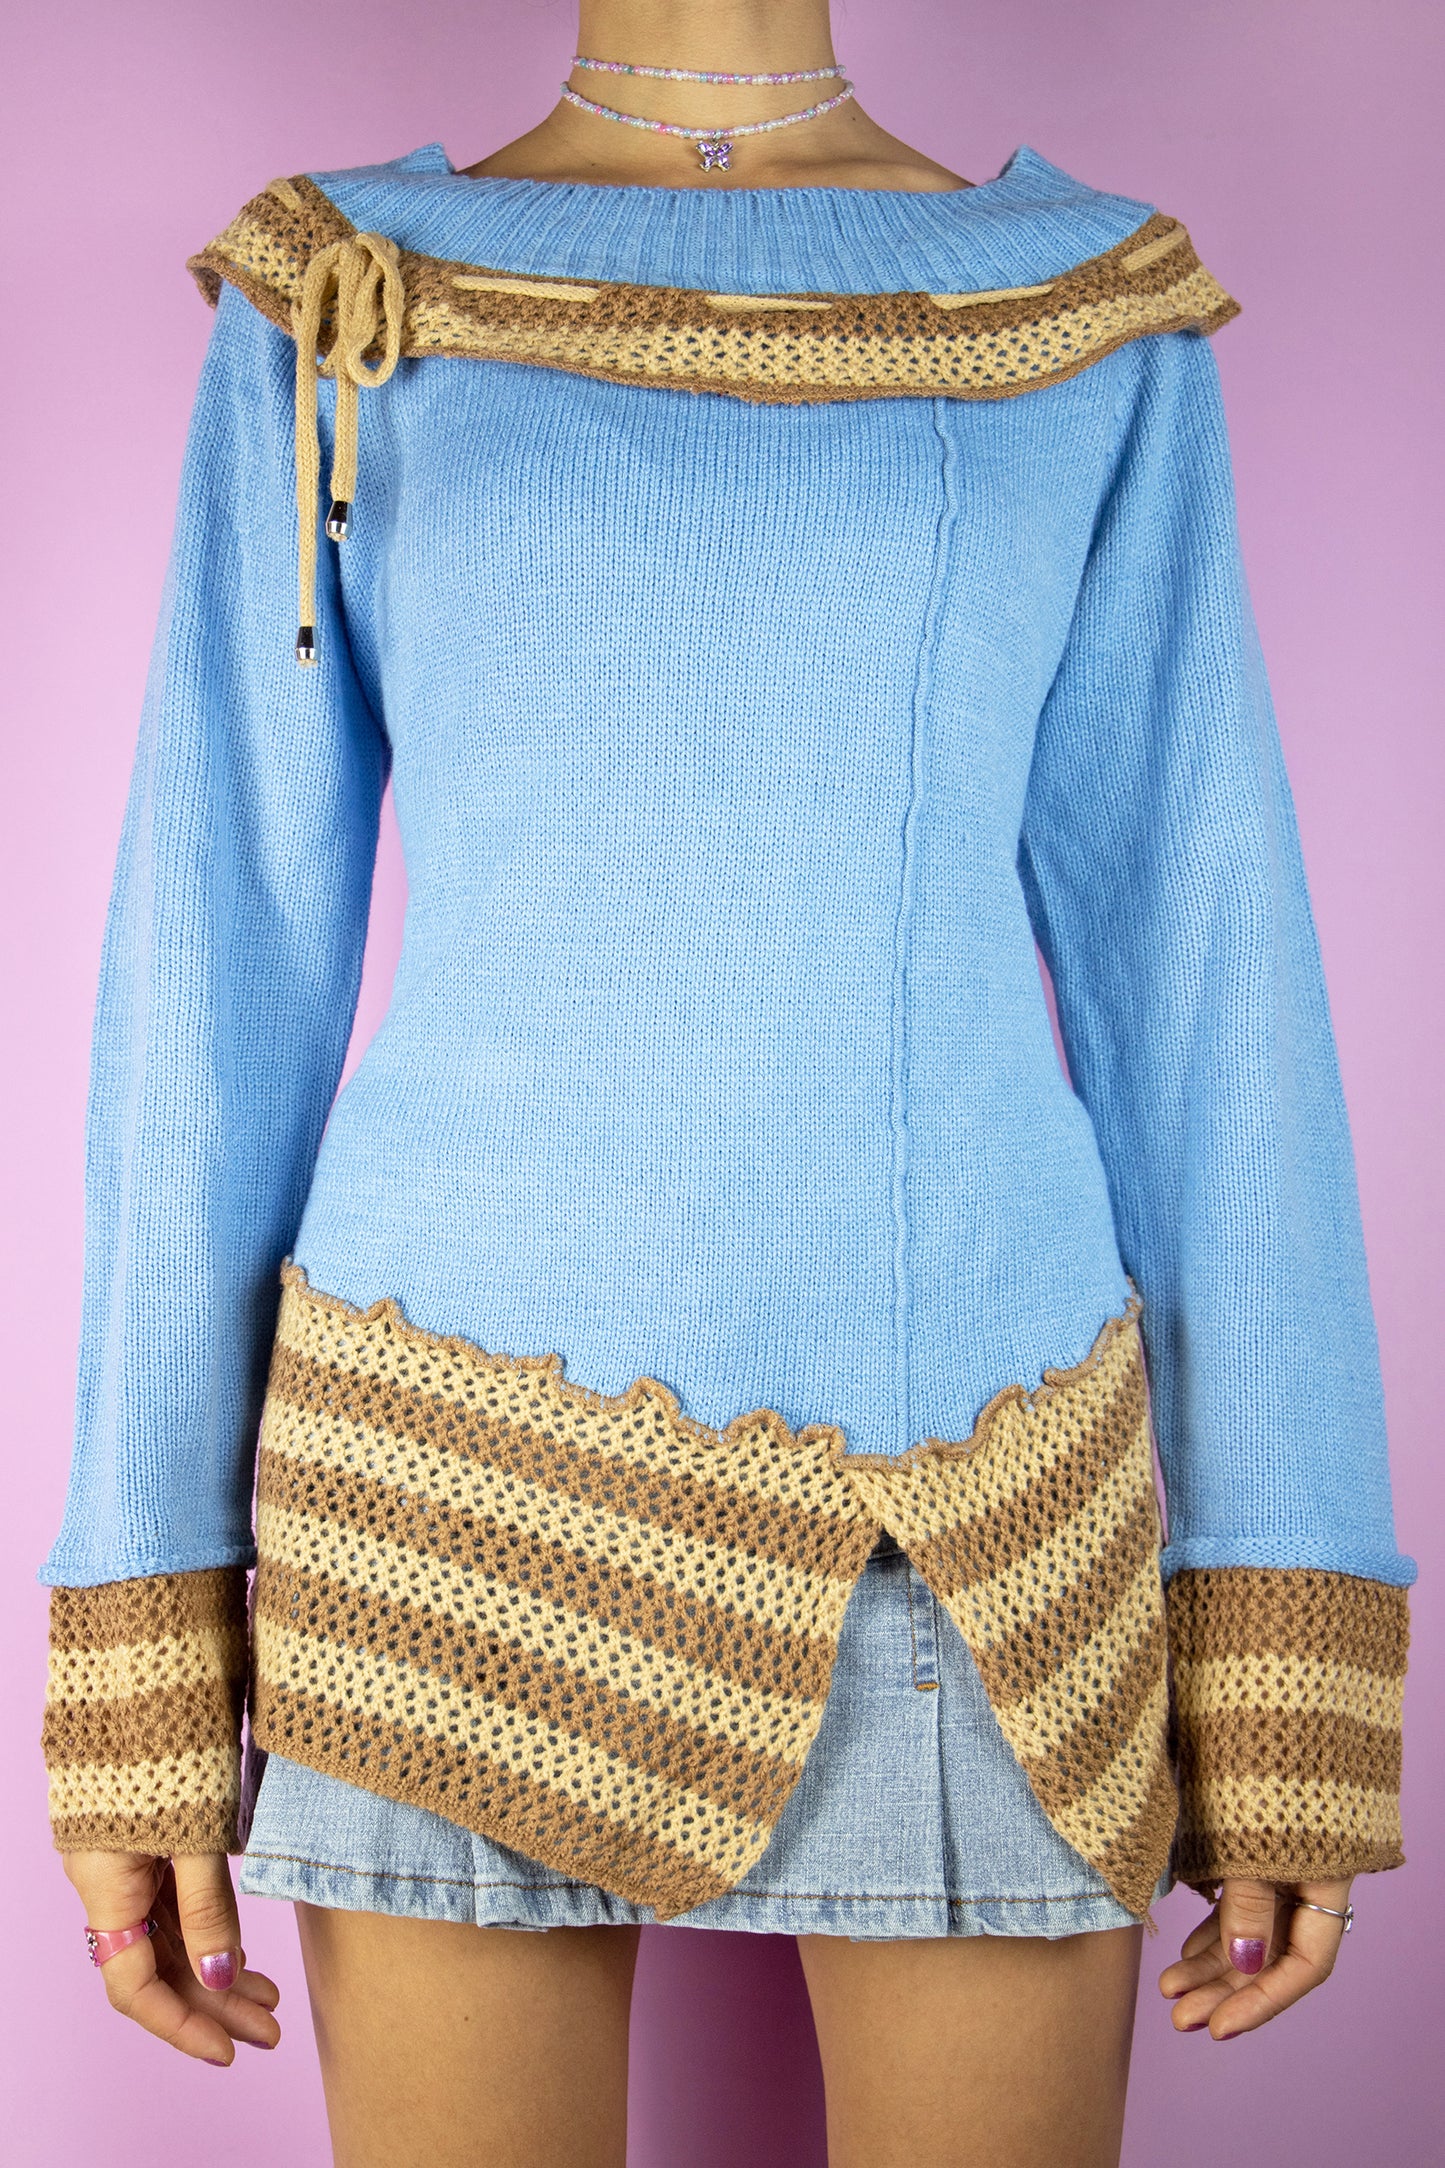 The Y2K Fairy Asymmetric Knit Sweater is a vintage 2000s boho grunge style blue pullover with brown and beige crochet details.